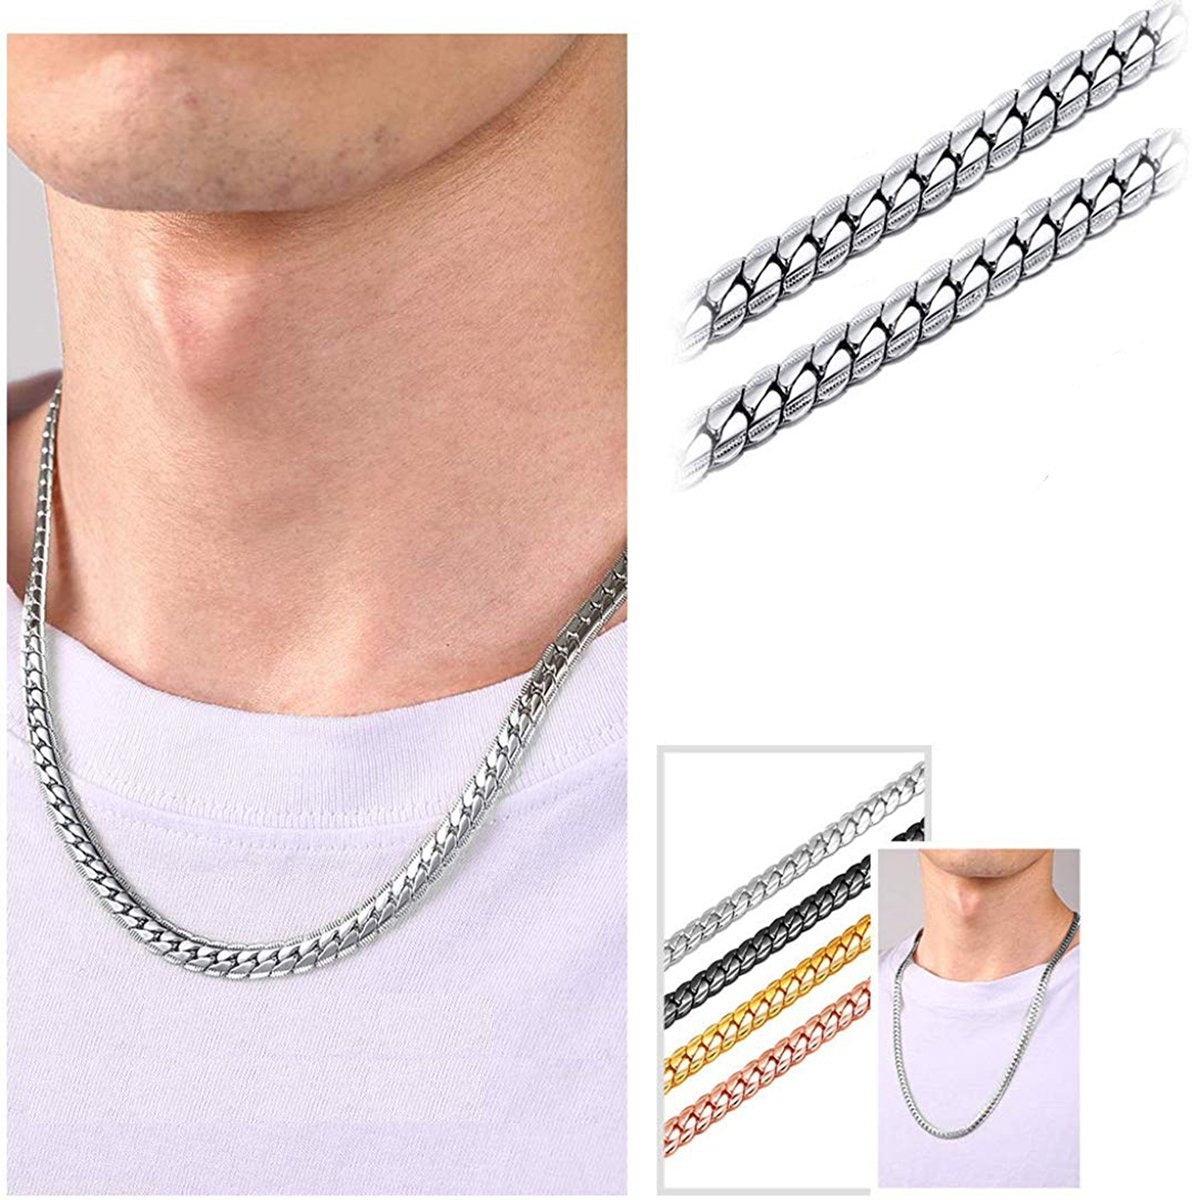 Sparkling Baguette Necklace With CZ Accents For Men Intial Boss Letters,  Gradent Graduation Mens Charm Necklace From Igbvb, $50.26 | DHgate.Com